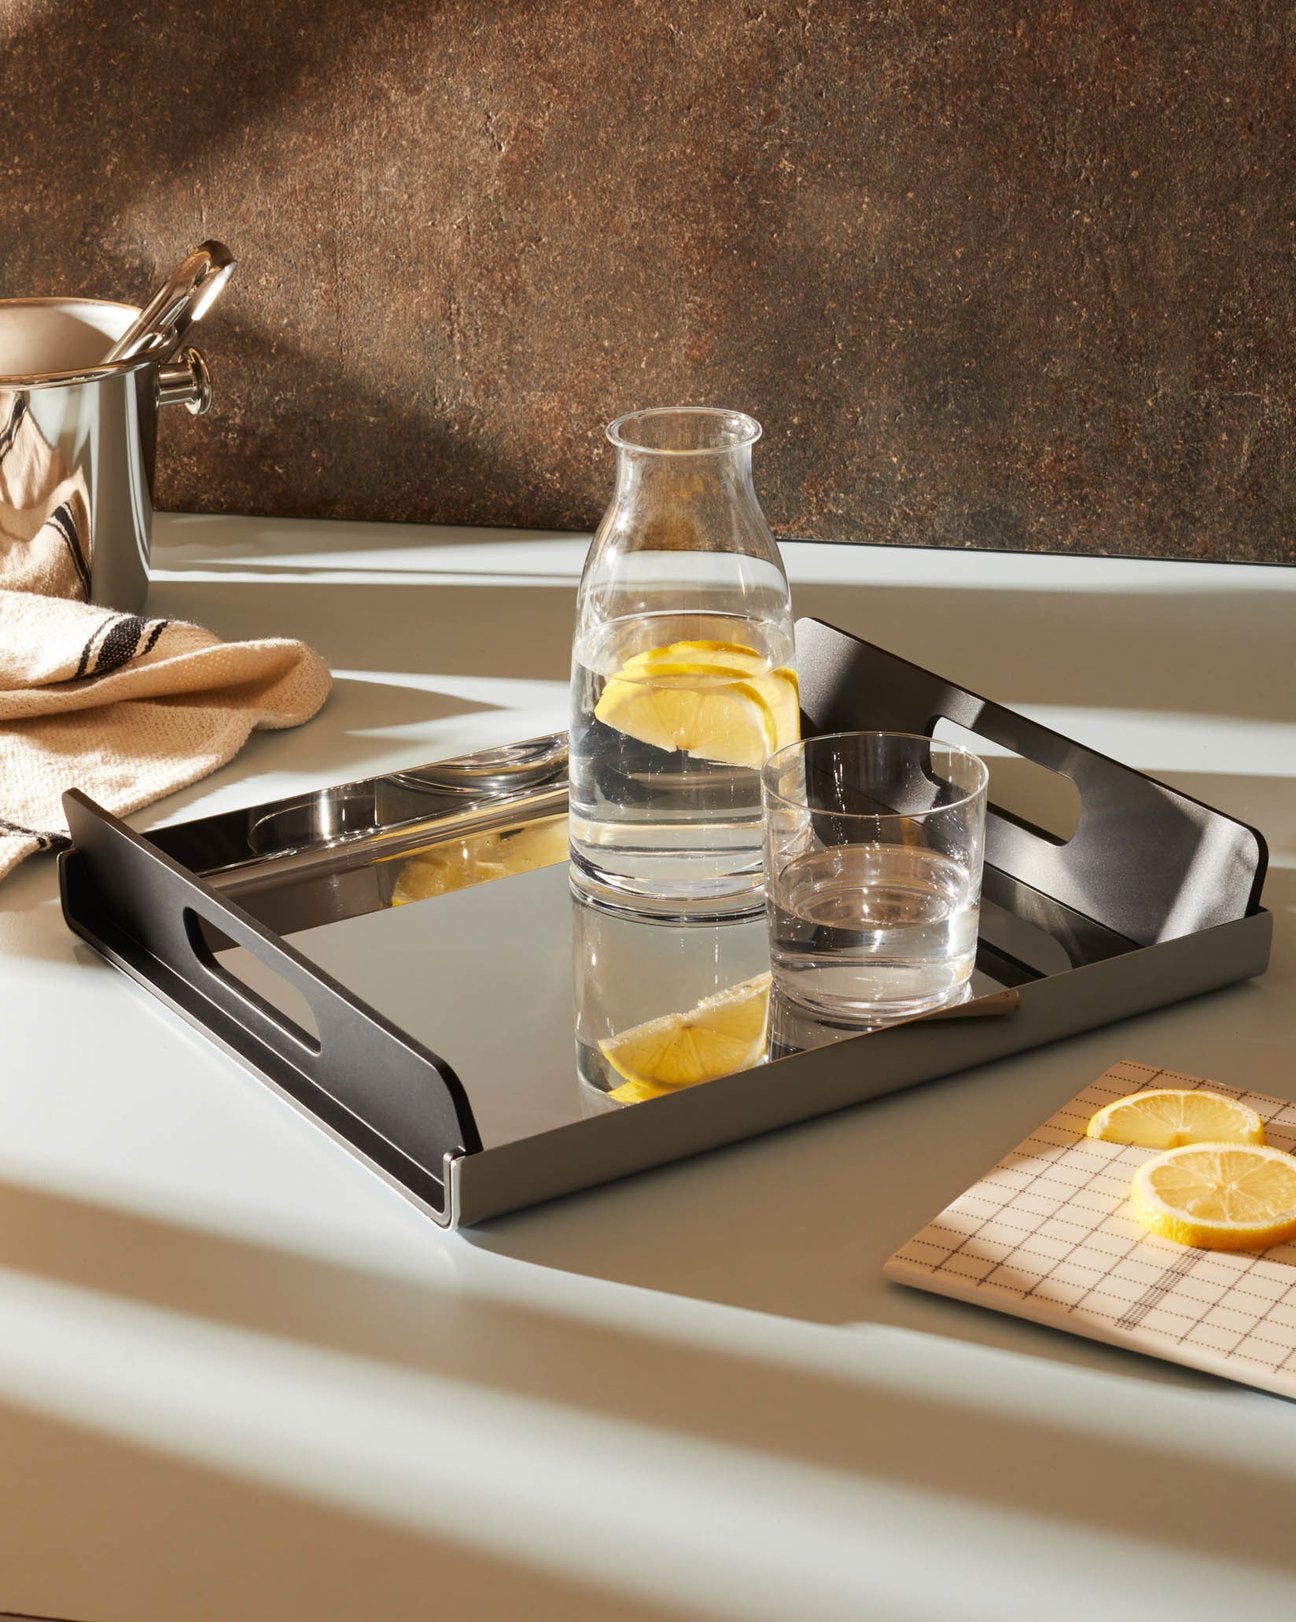 Alessi Serving Tray with Black Handles VASSILY | Panik Design